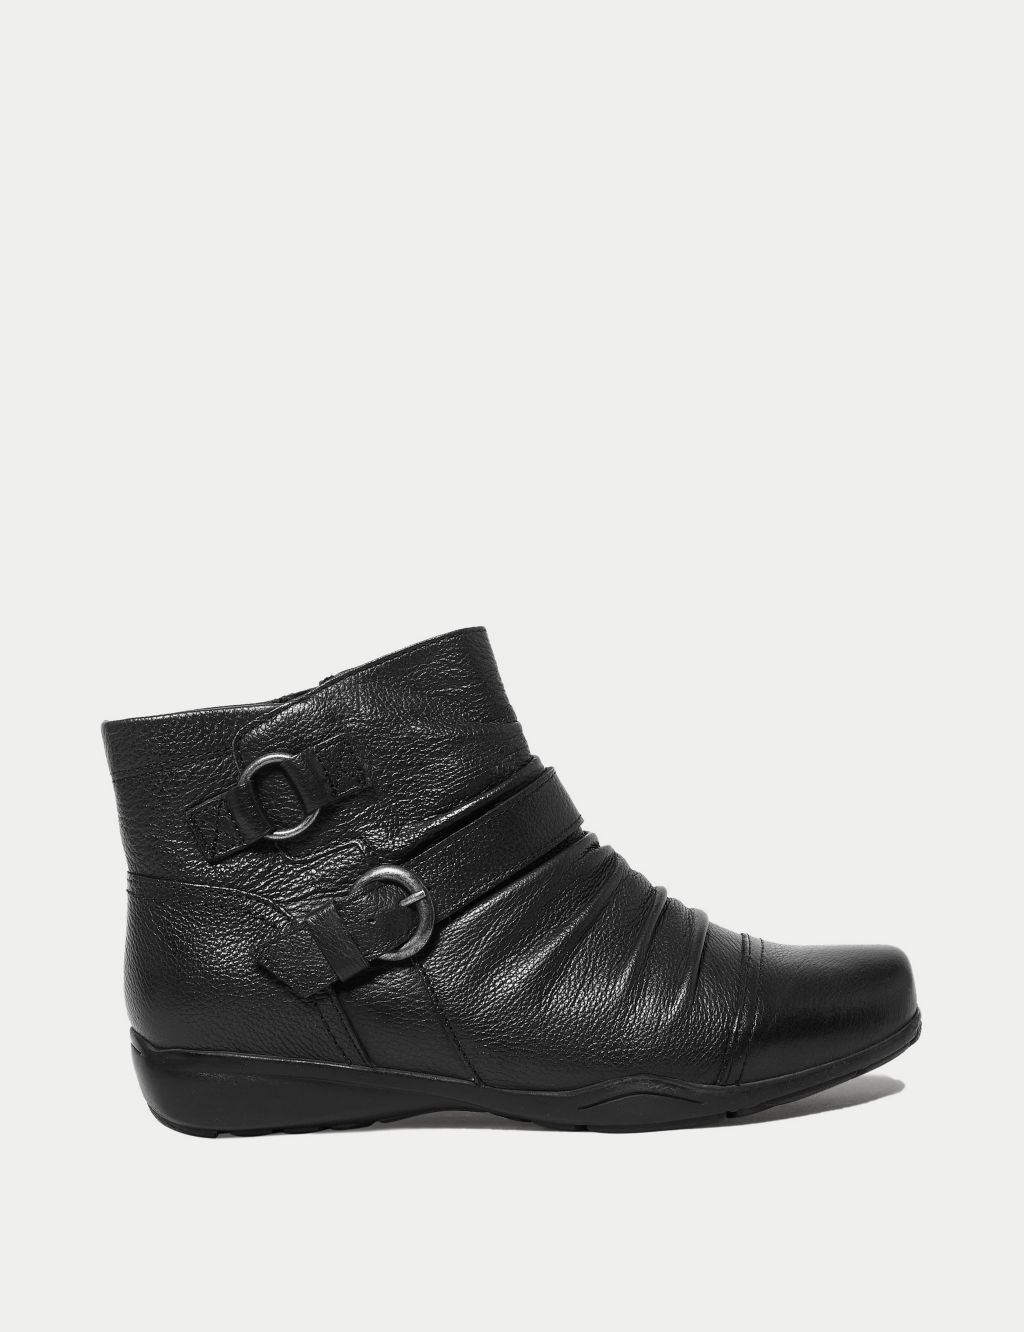 Wide Fit Leather Buckle Ruched Ankle Boots image 1